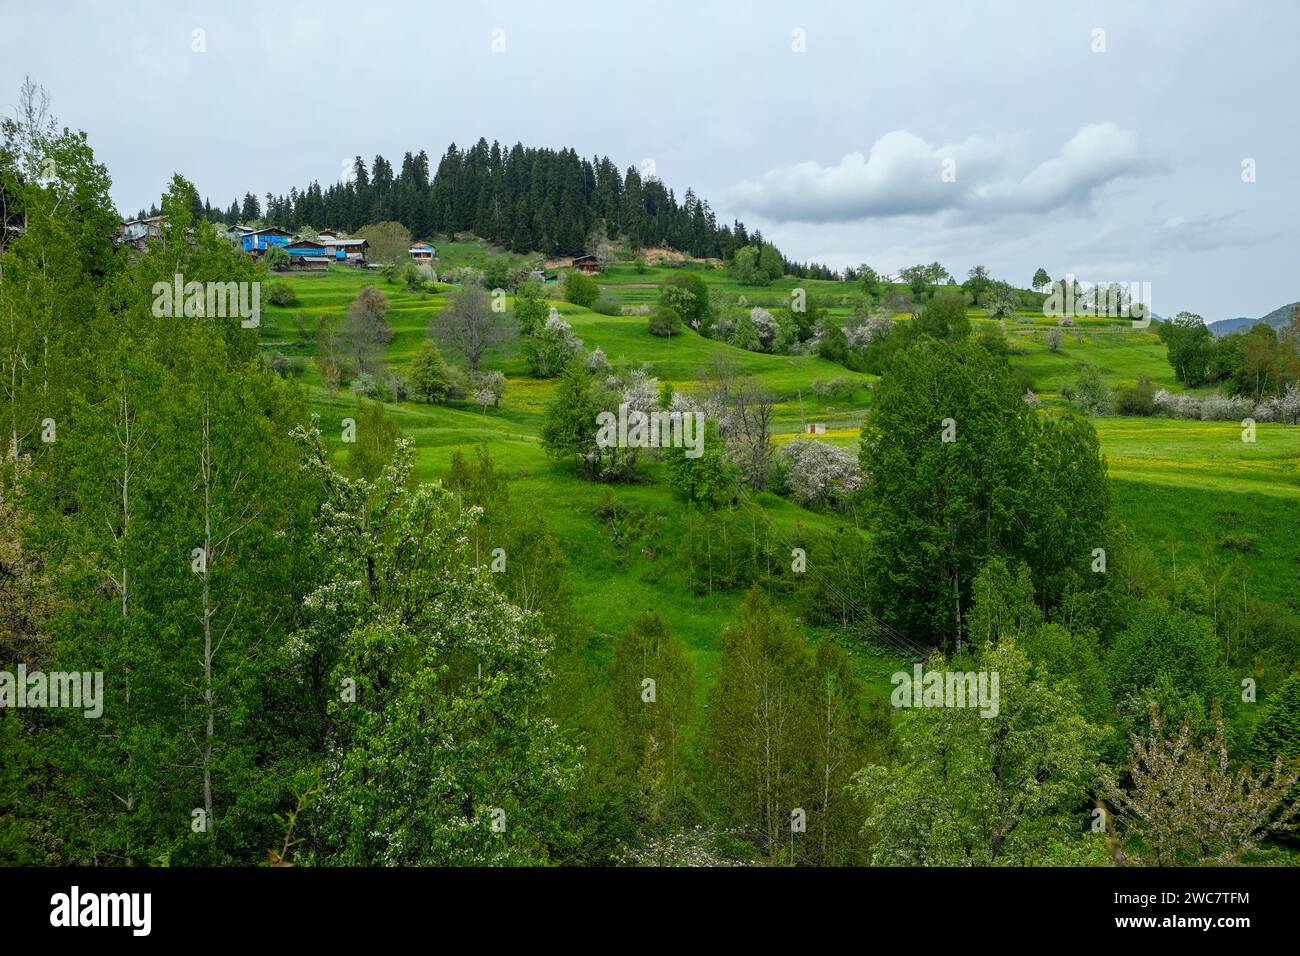 A typical village settlement with traditional houses in Şavşat district of Artvin province. Stock Photo